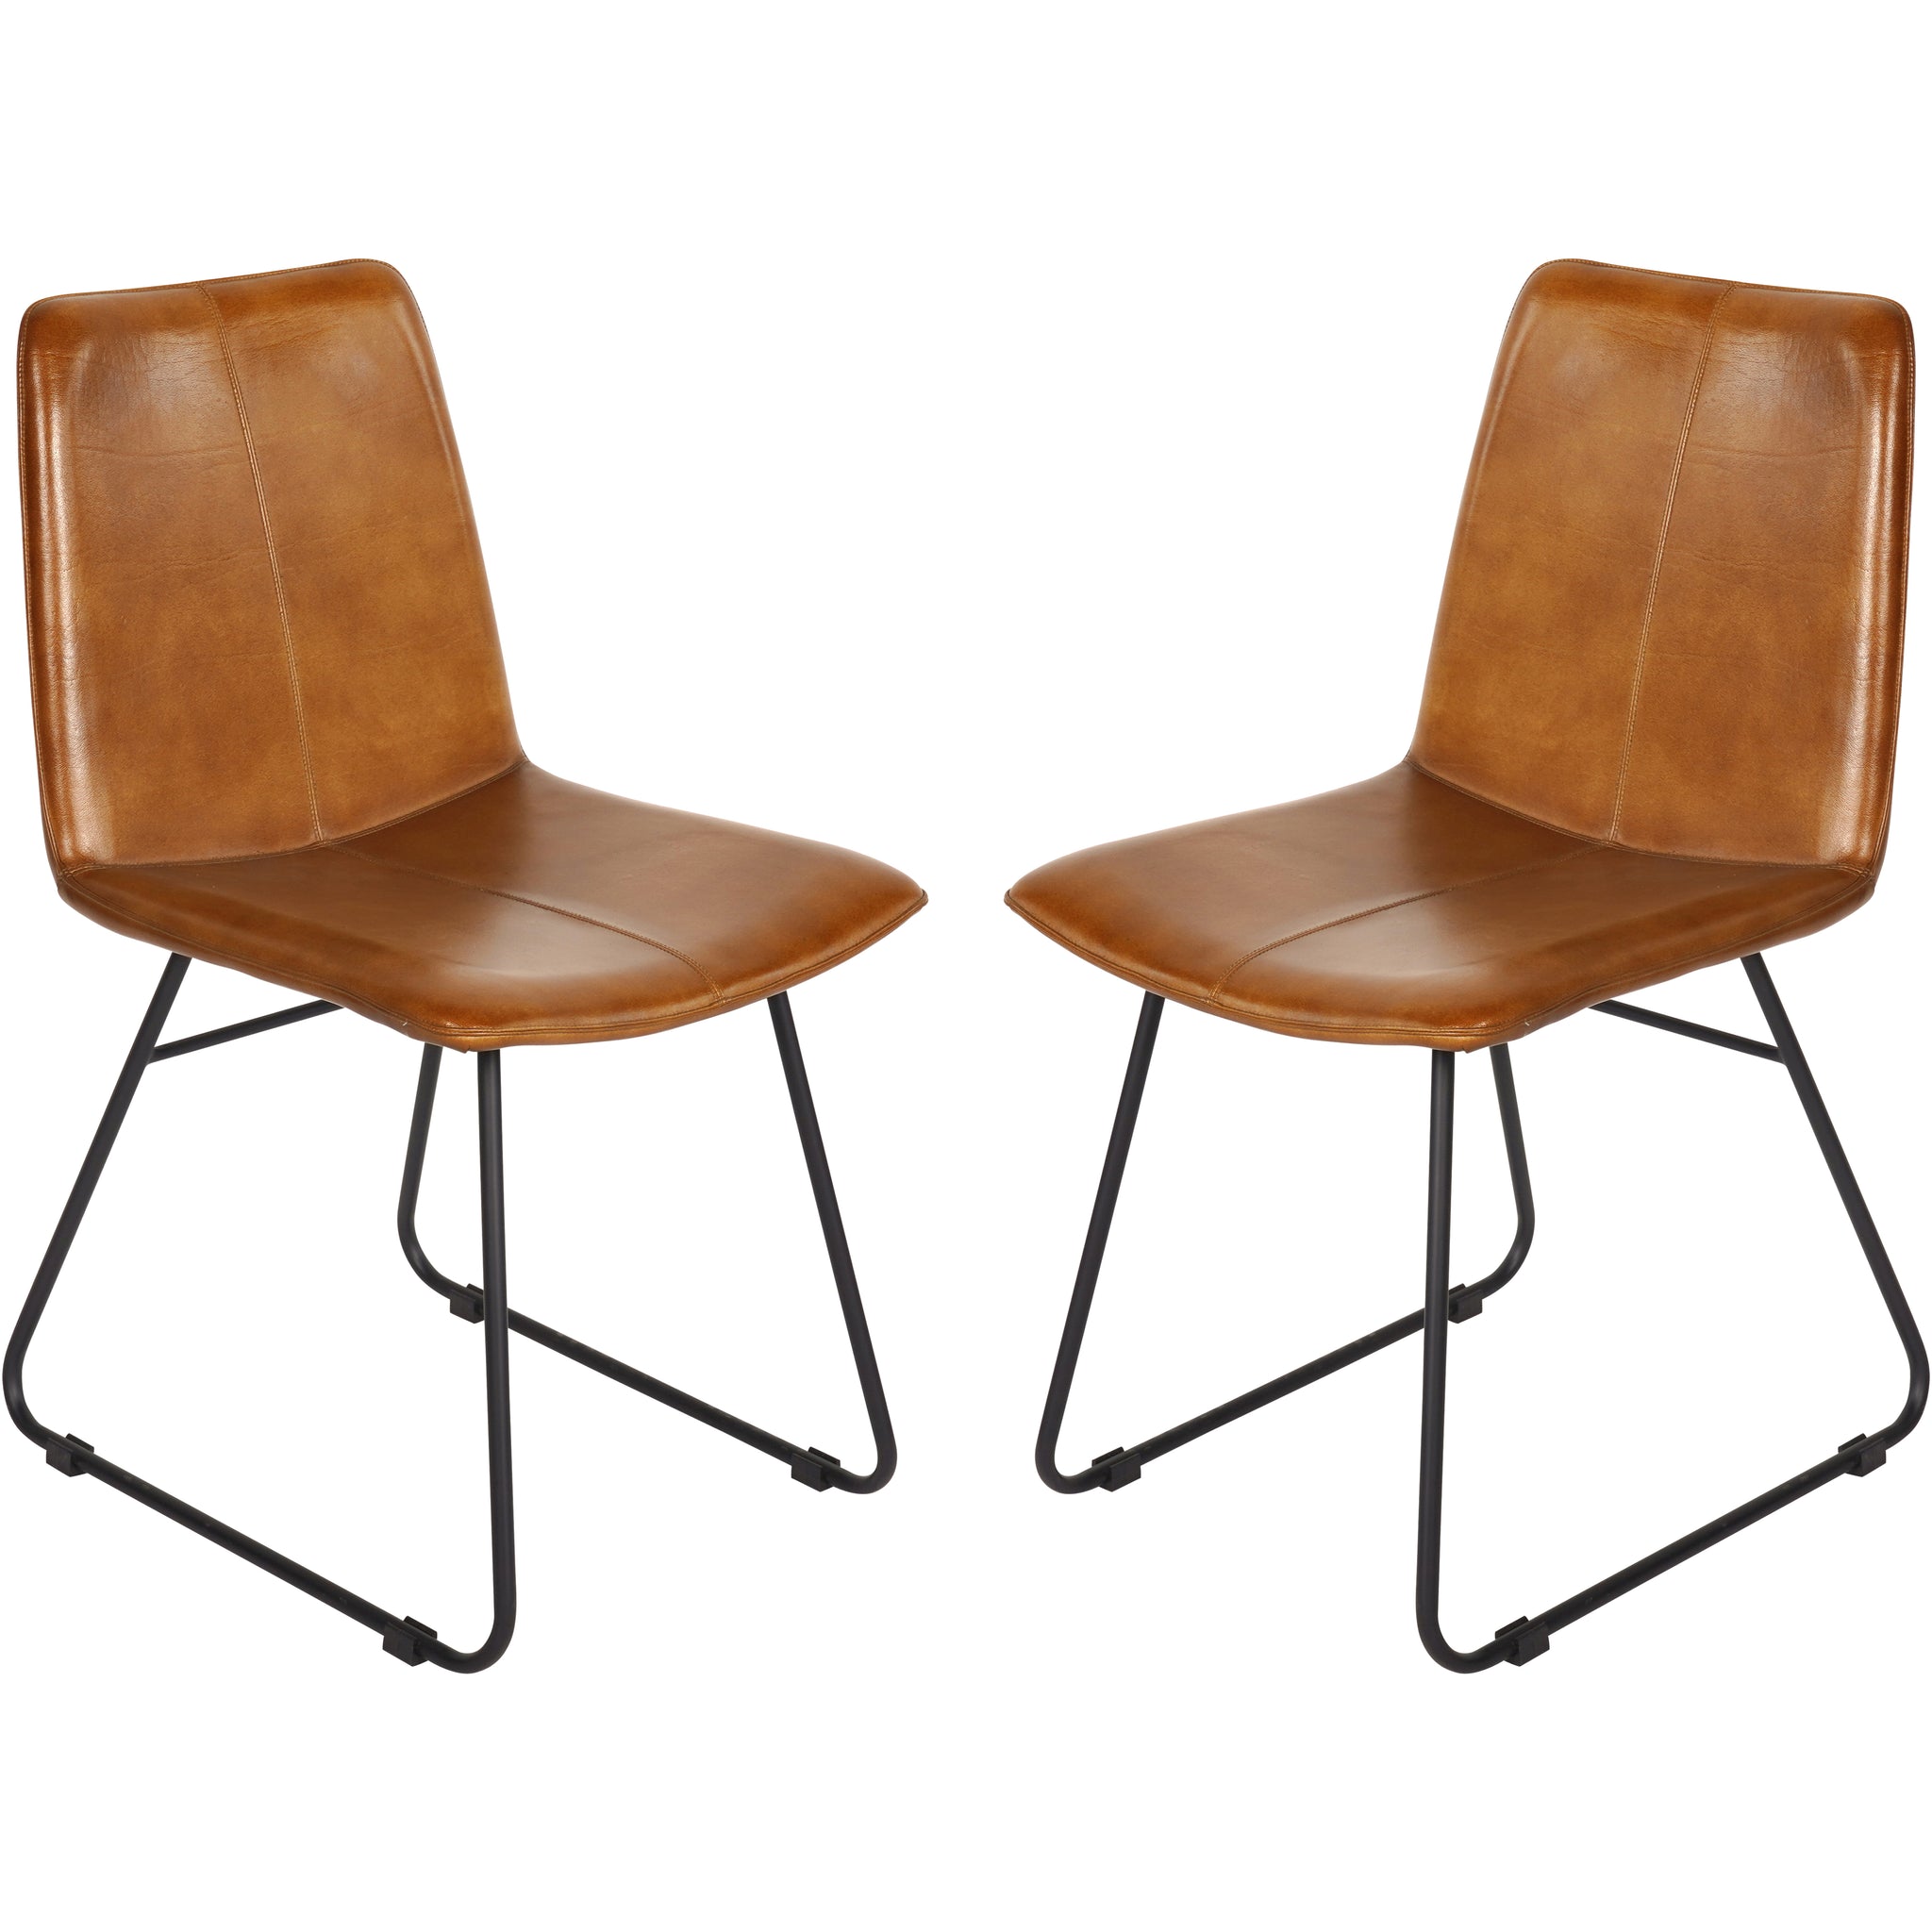 Set of 2 Baskin Leather Dining Chairs in Cognac